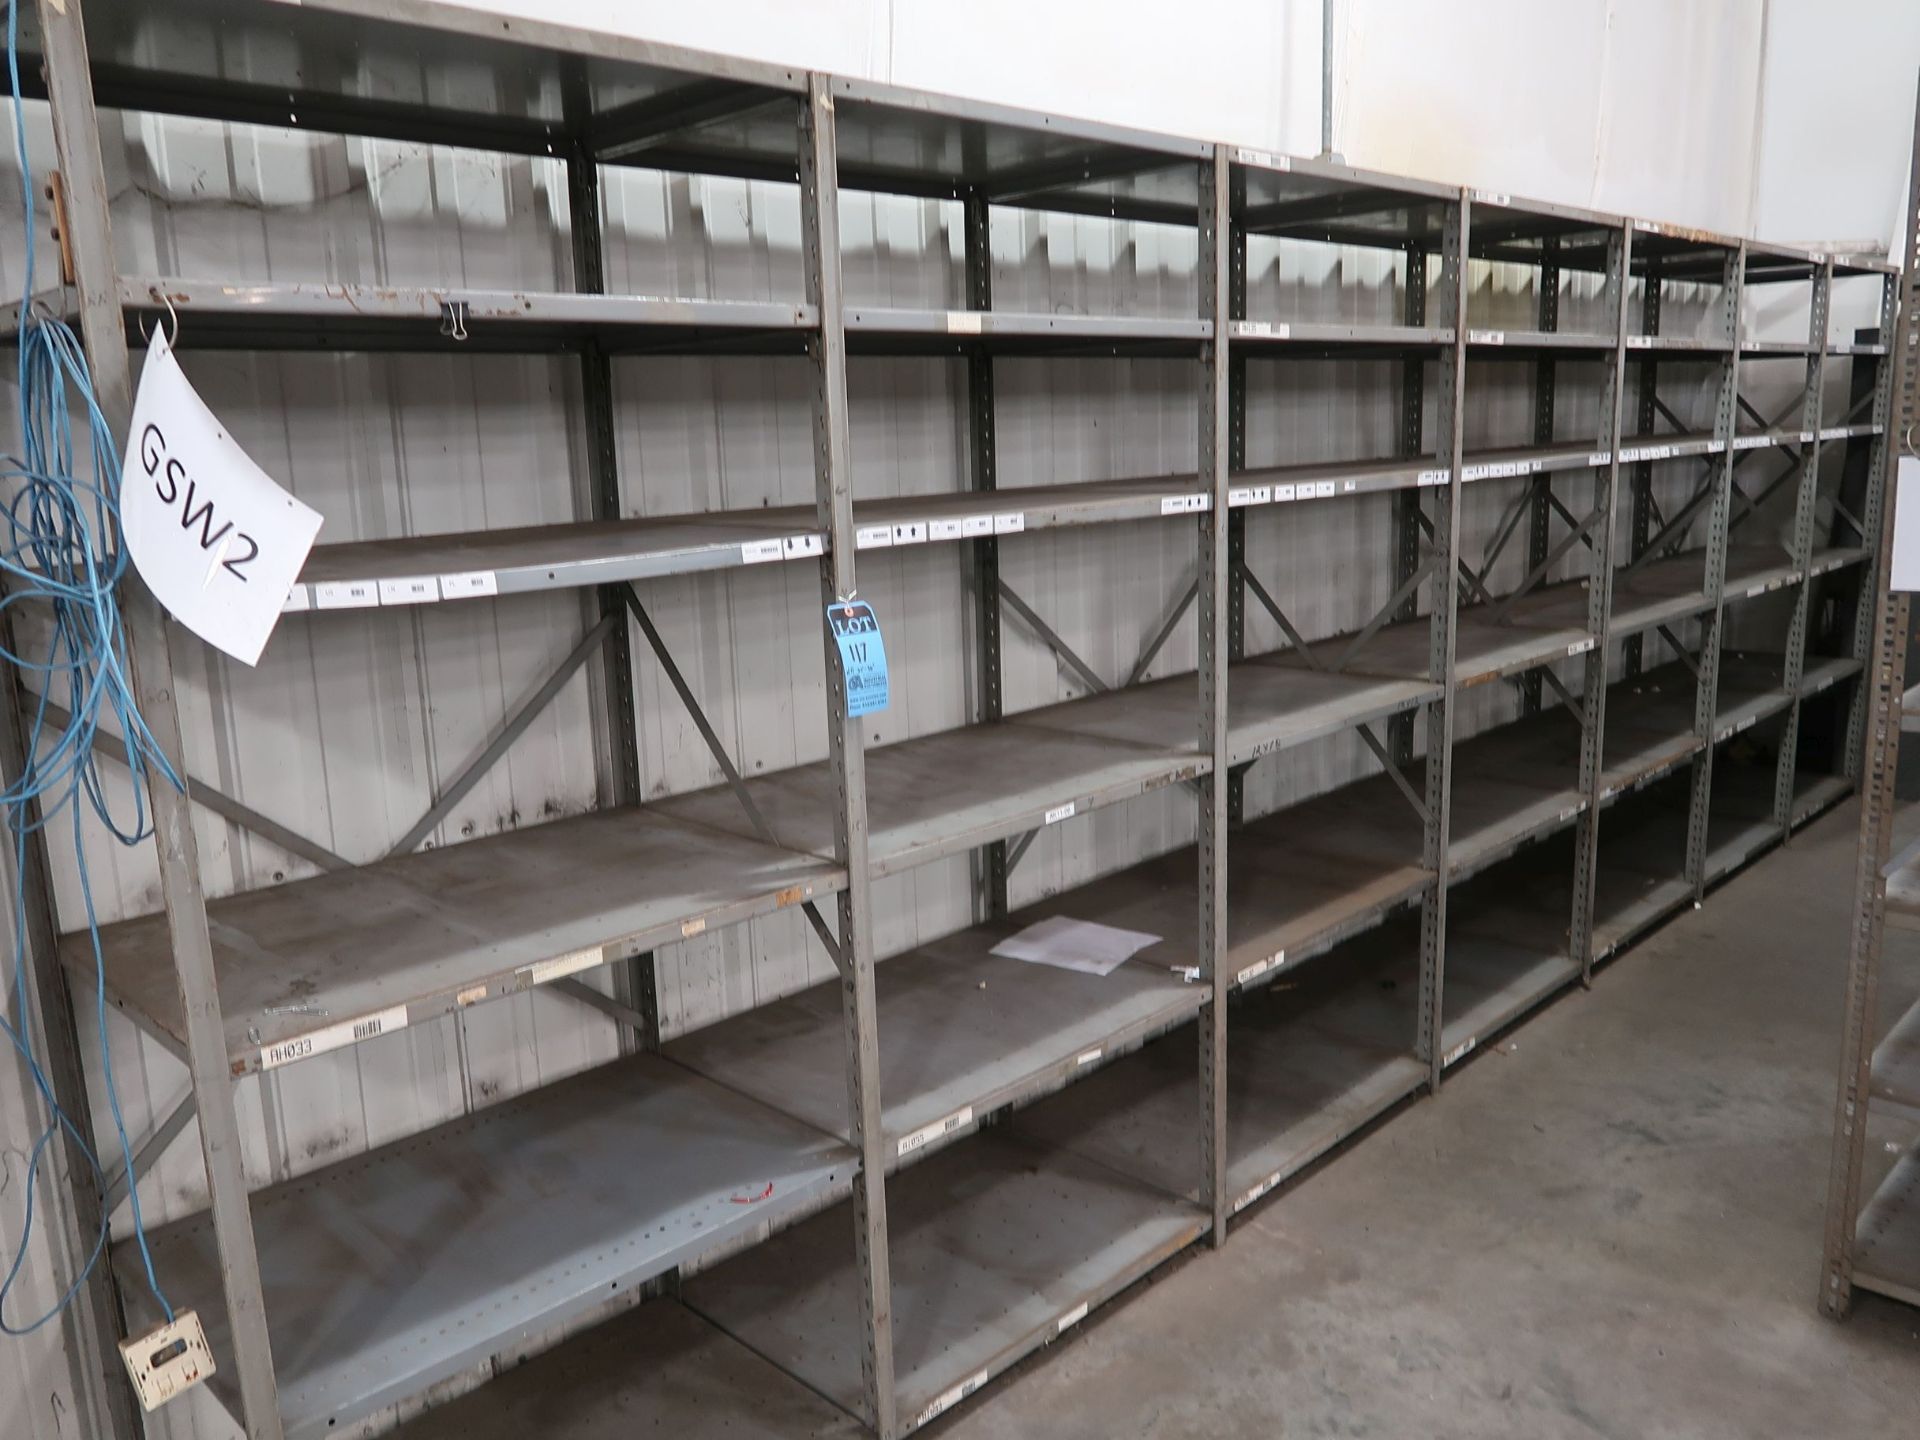 SECTIONS 24" X 36" X 85" STEEL SHELVES, (6) SHELVES PER SECTION - Image 2 of 3